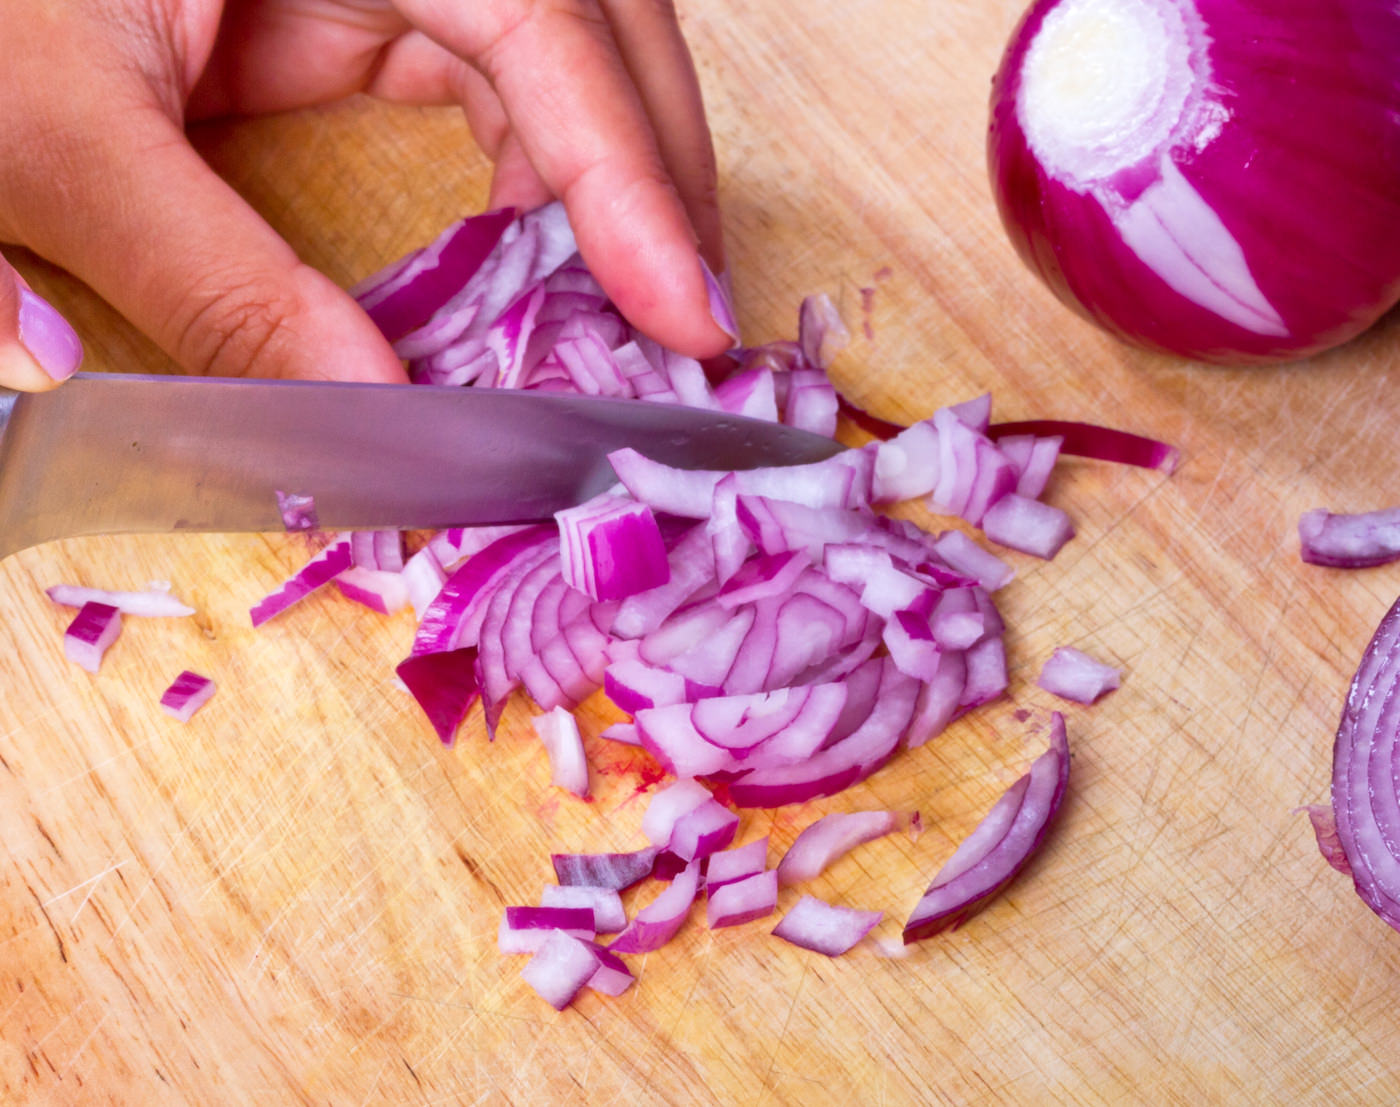 Chopping red onion on the kitchen cutting board